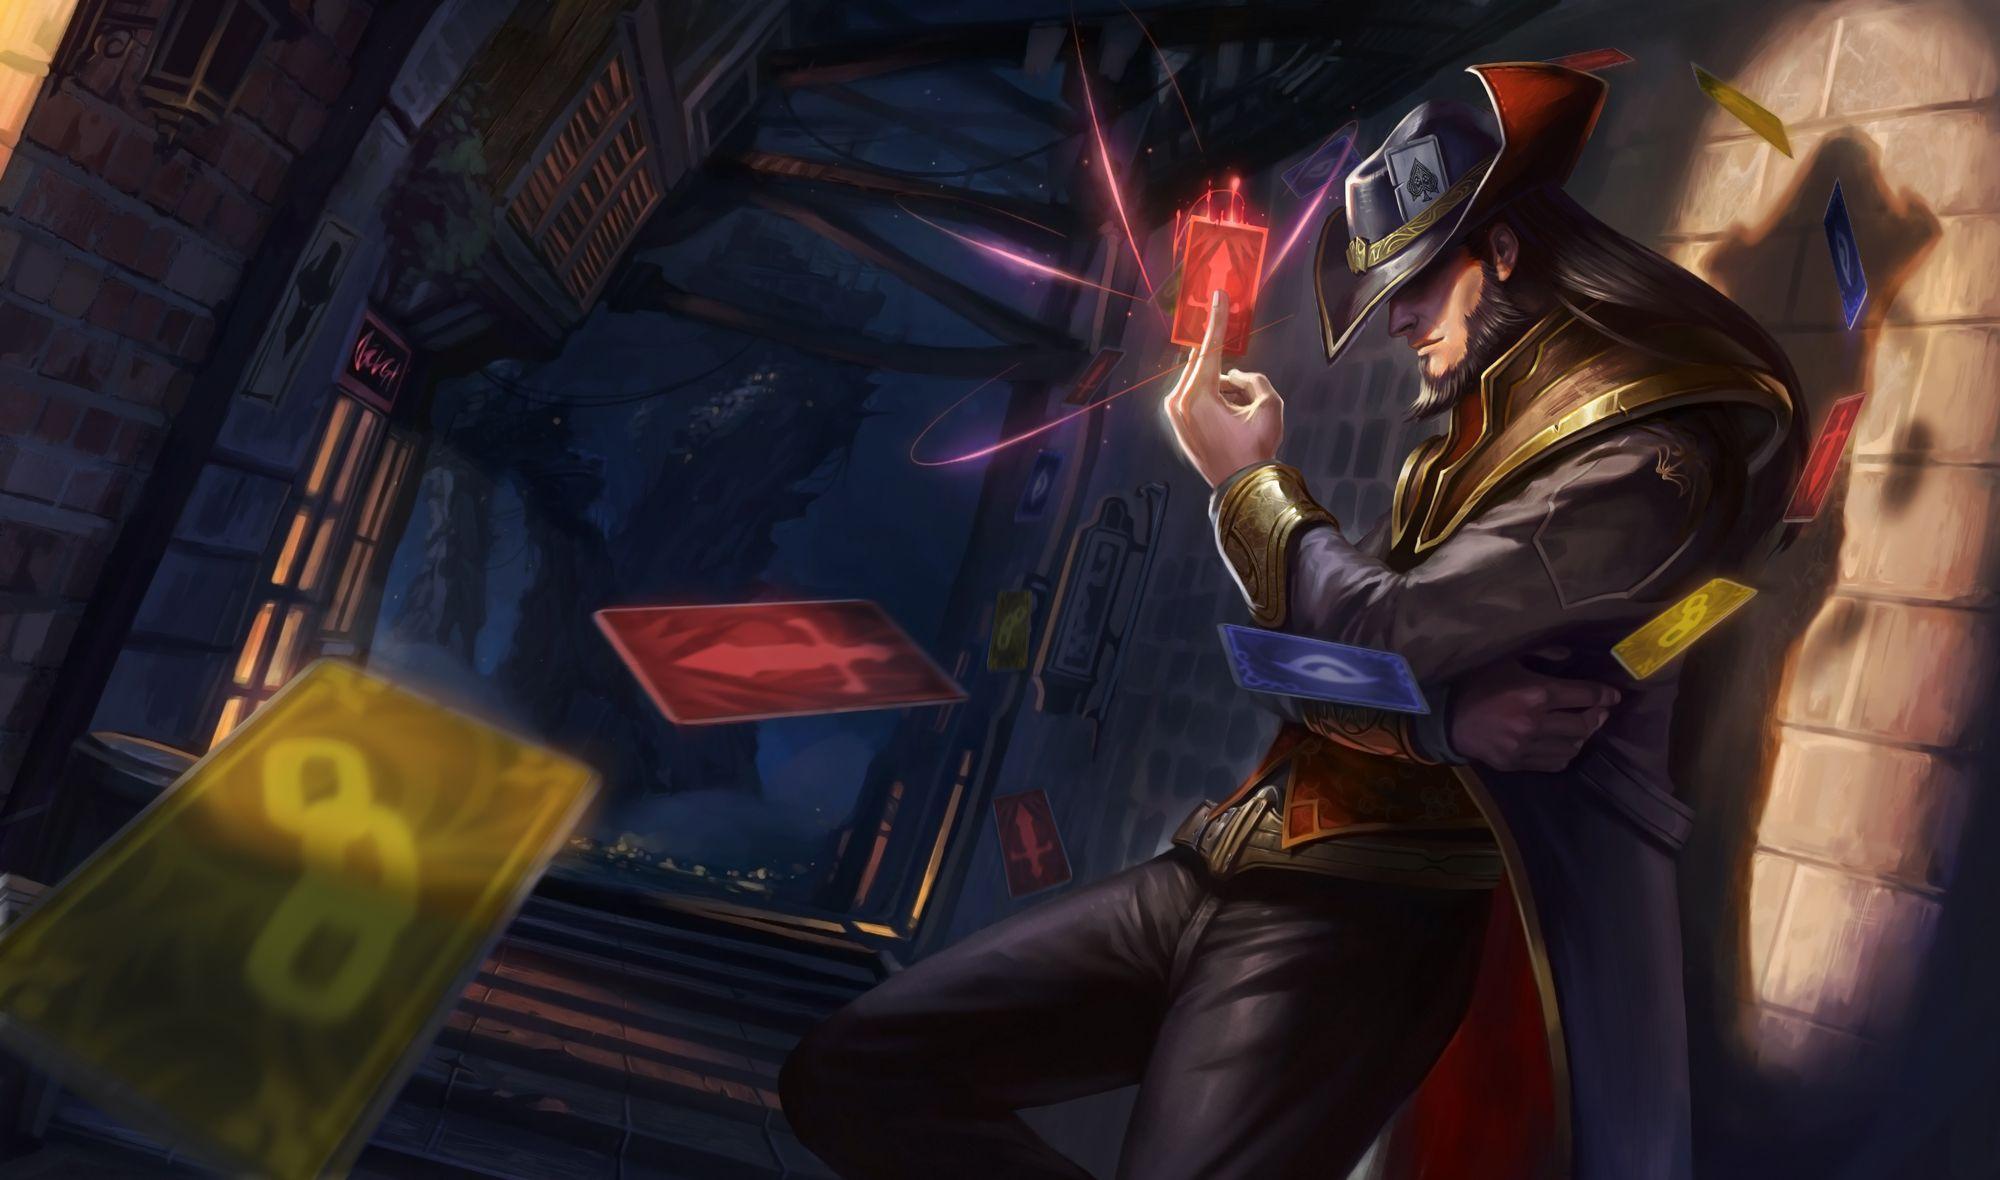 Tons of awesome league of legends twisted fate wallpapers to download for f...